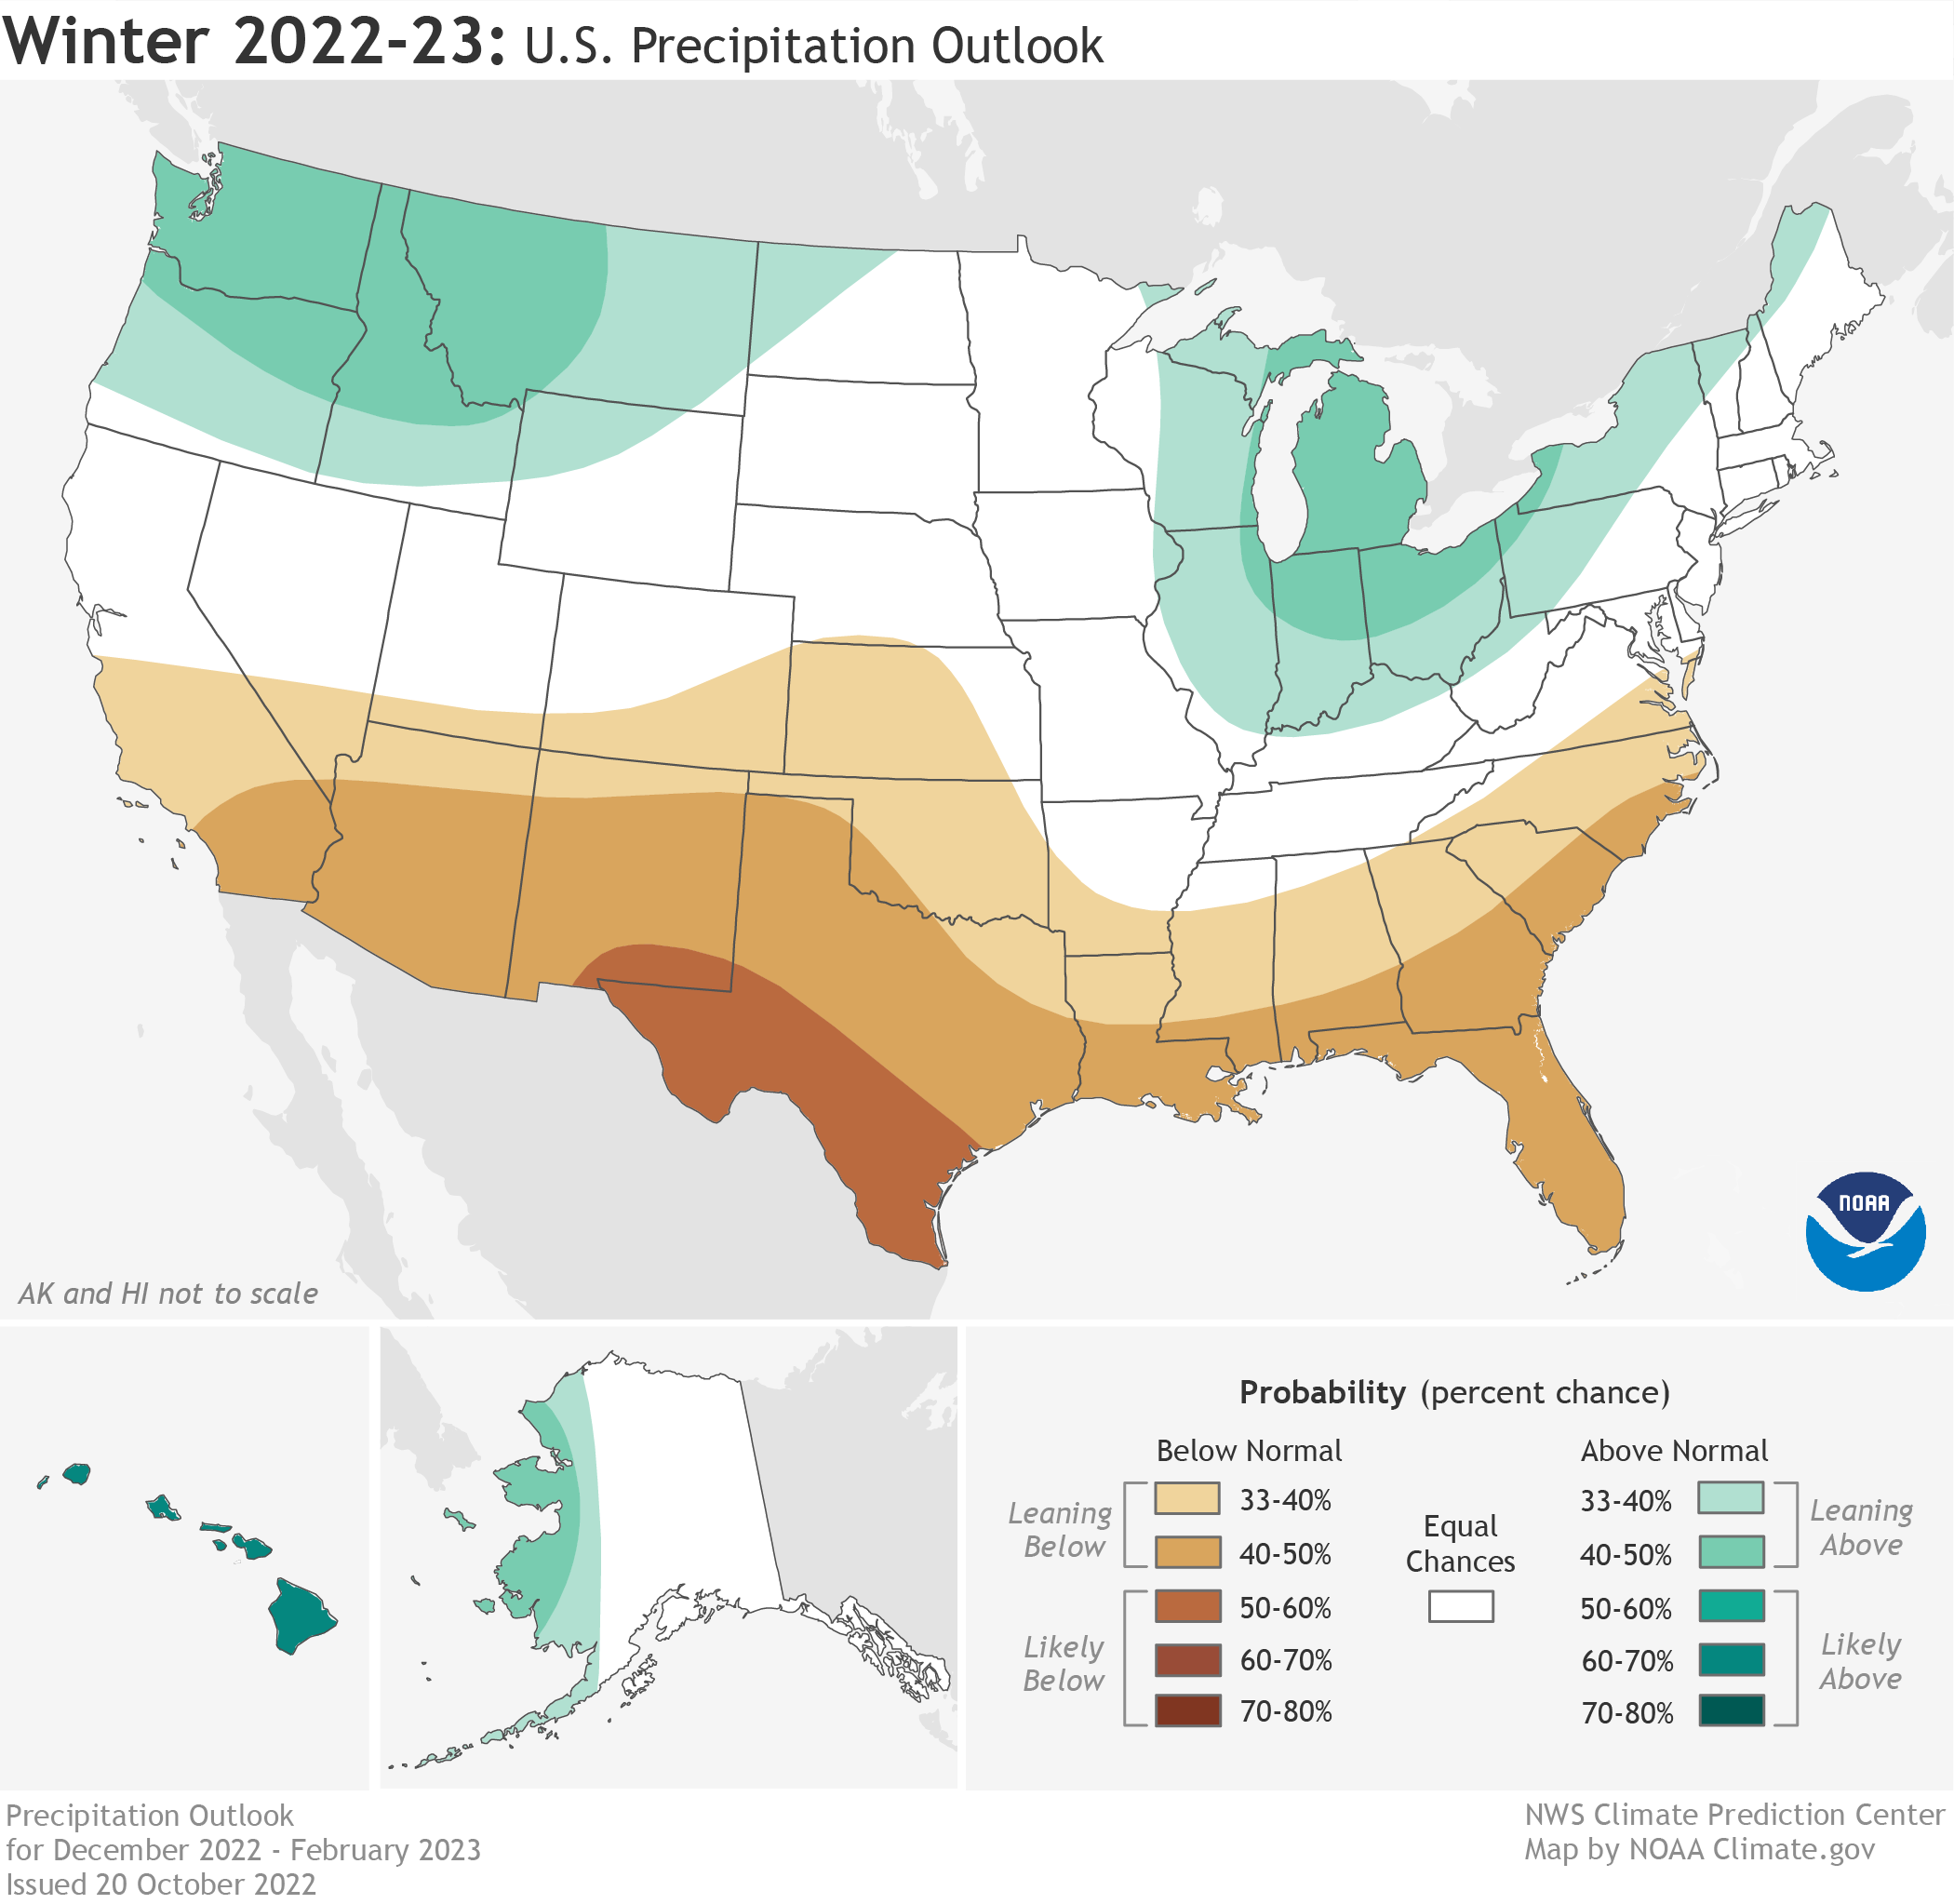 Map showing the 2022-2023 U.S. Winter Outlook map for precipitation shows wetter-than-average conditions are most likely in western Alaska, the Pacific Northwest, northern Rockies, Great Lakes and Ohio Valley. Drier-than-average conditions are forecast in portions of California, the Southwest, the southern Rockies, southern Plains, Gulf Coast and much of the Southeast.